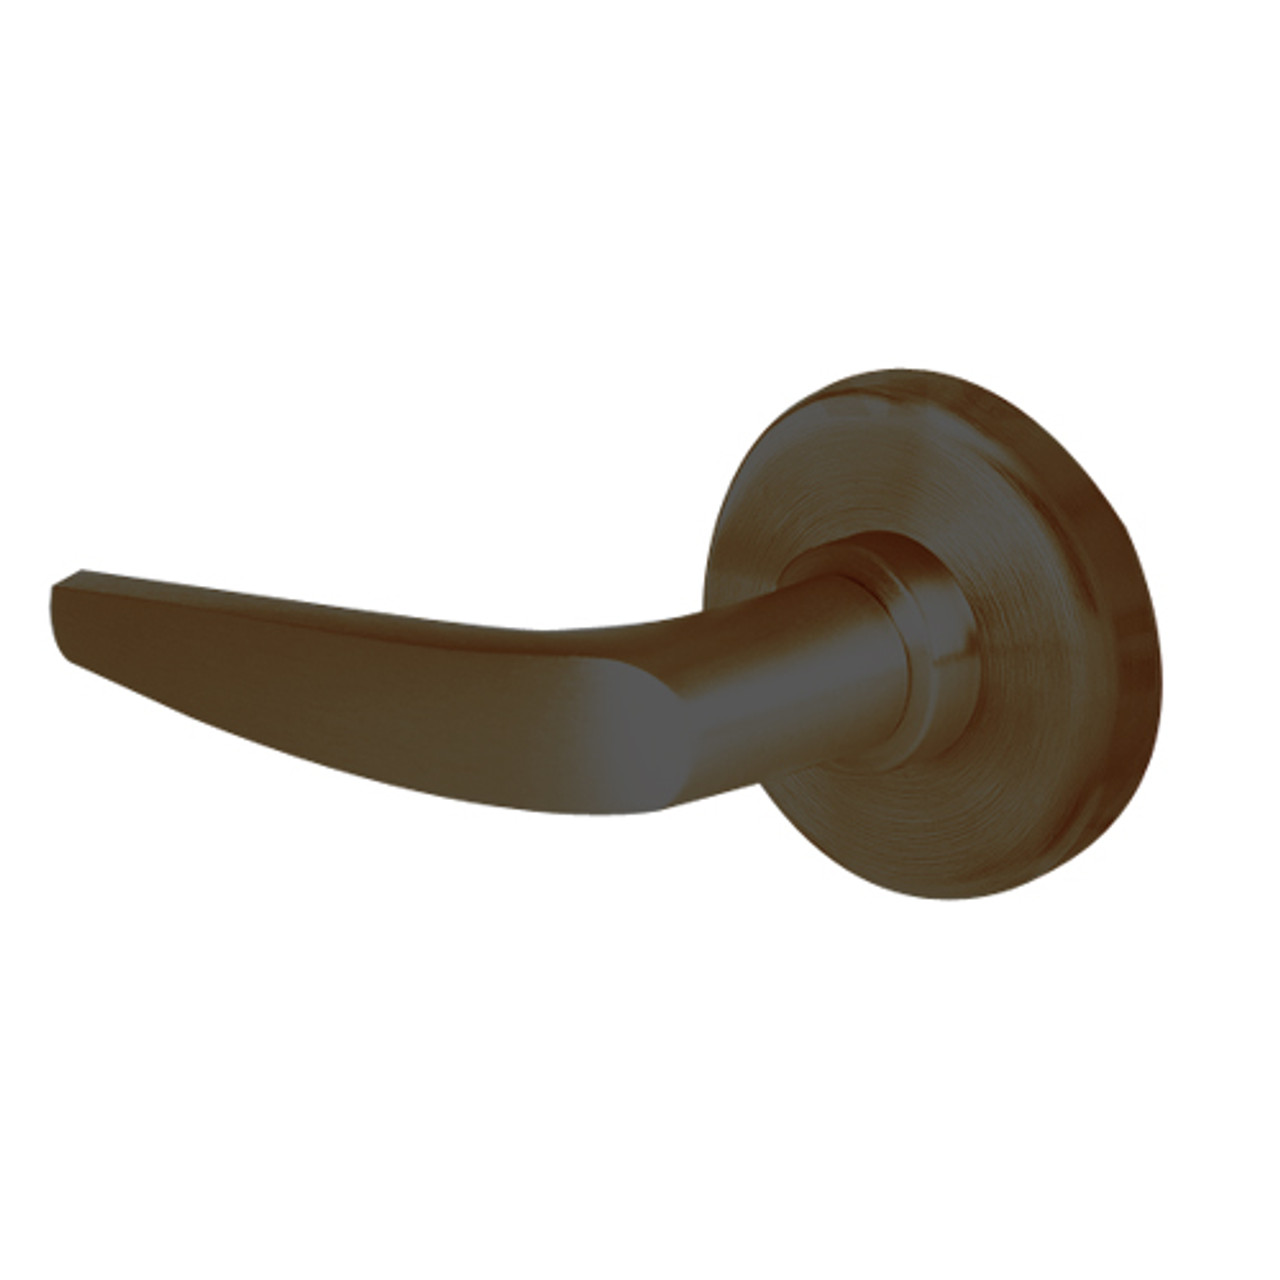 45H7G16R613 Best 40H Series Communicating with Deadbolt Heavy Duty Mortise Lever Lock with Curved with No Return in Oil Rubbed Bronze